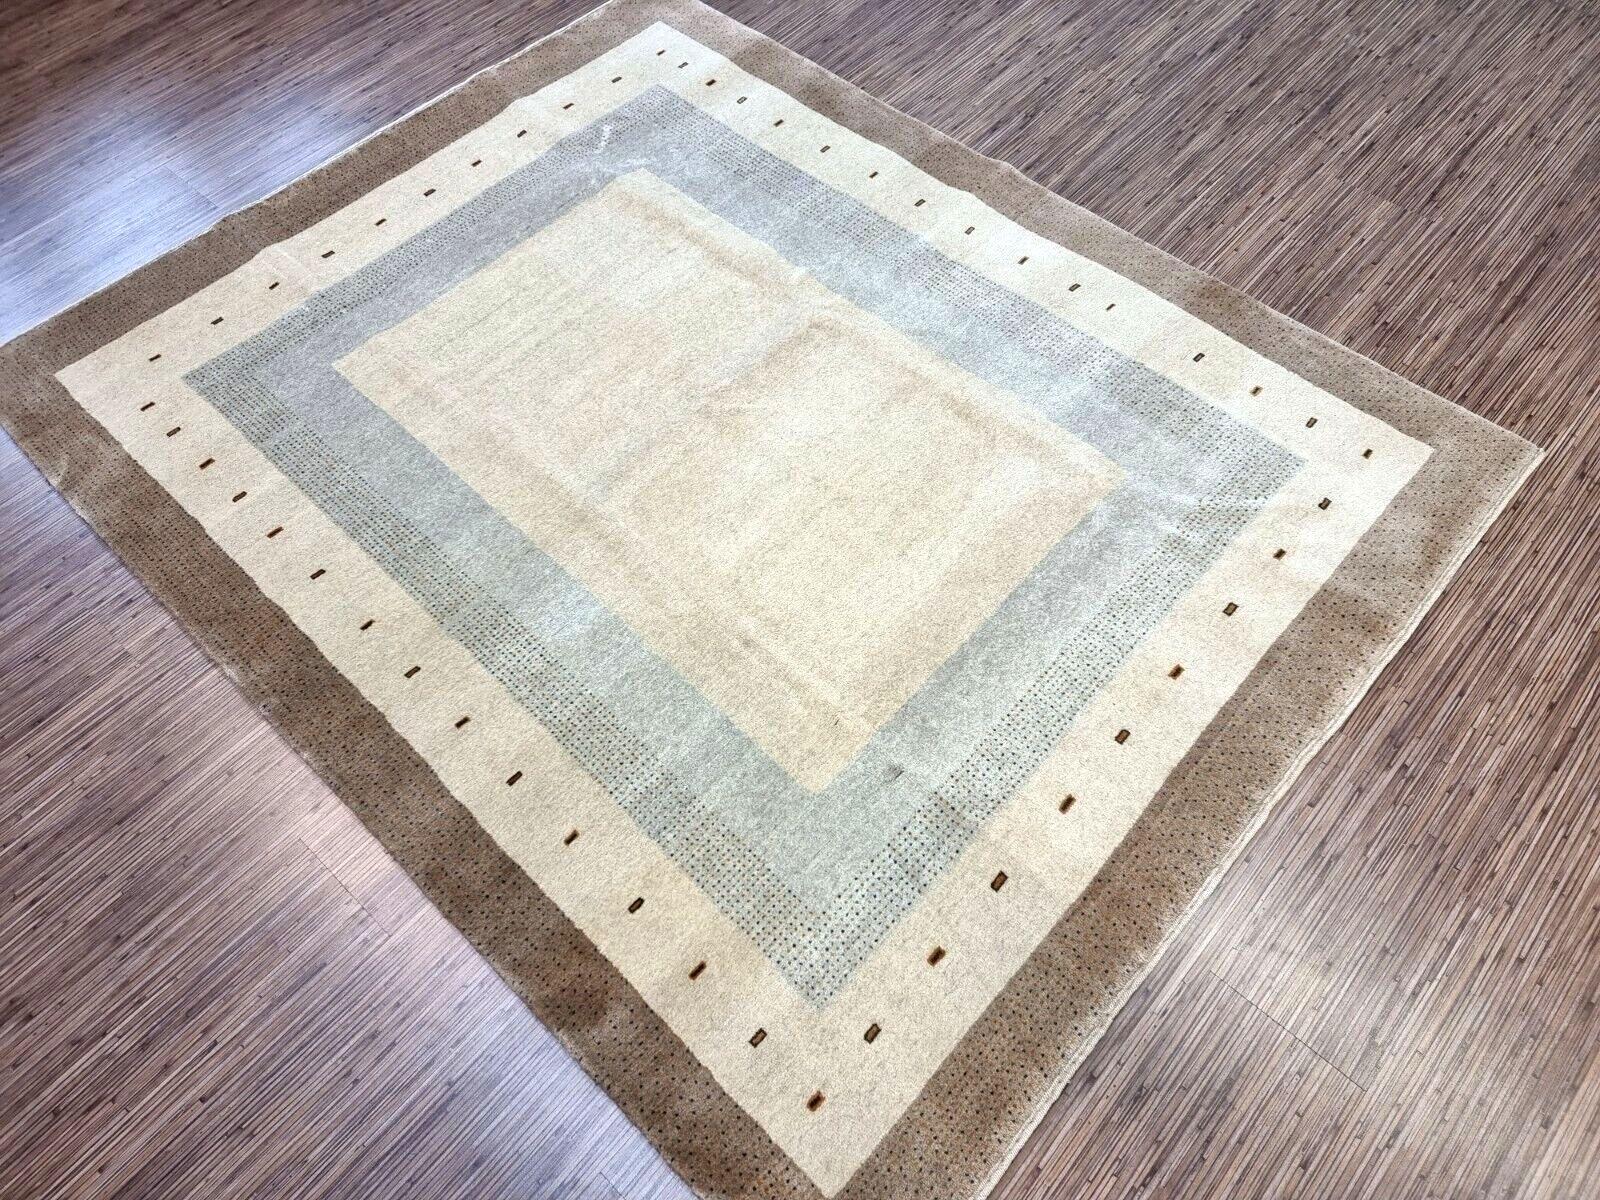 Design and Patterns:

This rug embodies the essence of traditional Gabbeh rugs, known for their thick pile and earthy color palette.
The base color is a soothing beige, creating a neutral canvas.
Geometric patterns and symbols are subtly woven into